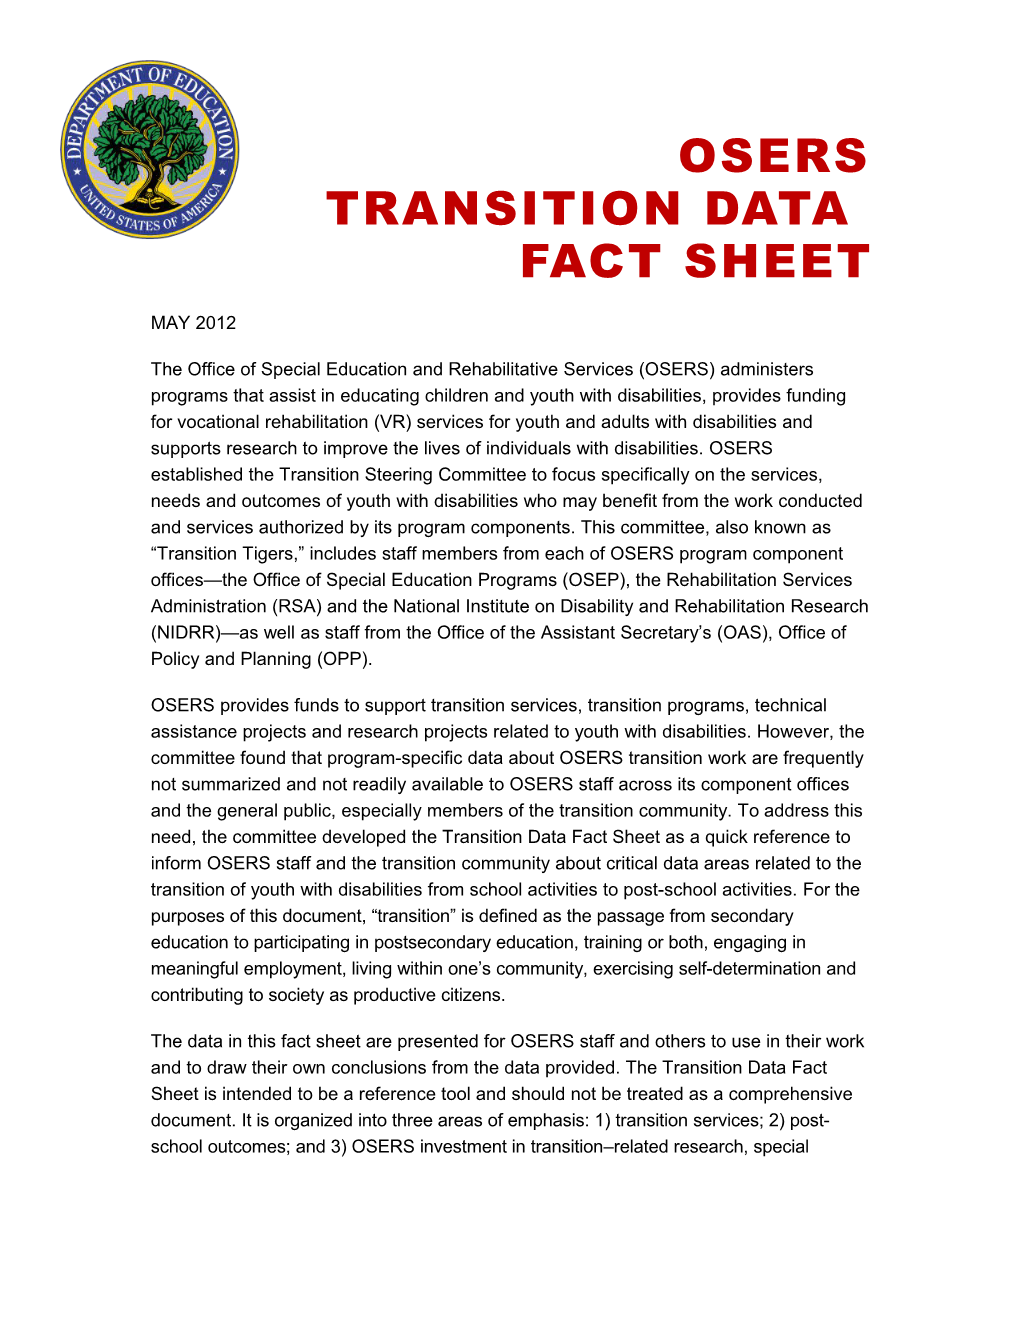 OSERS TRANSITION FACT SHEET, 2011 (MS Word)